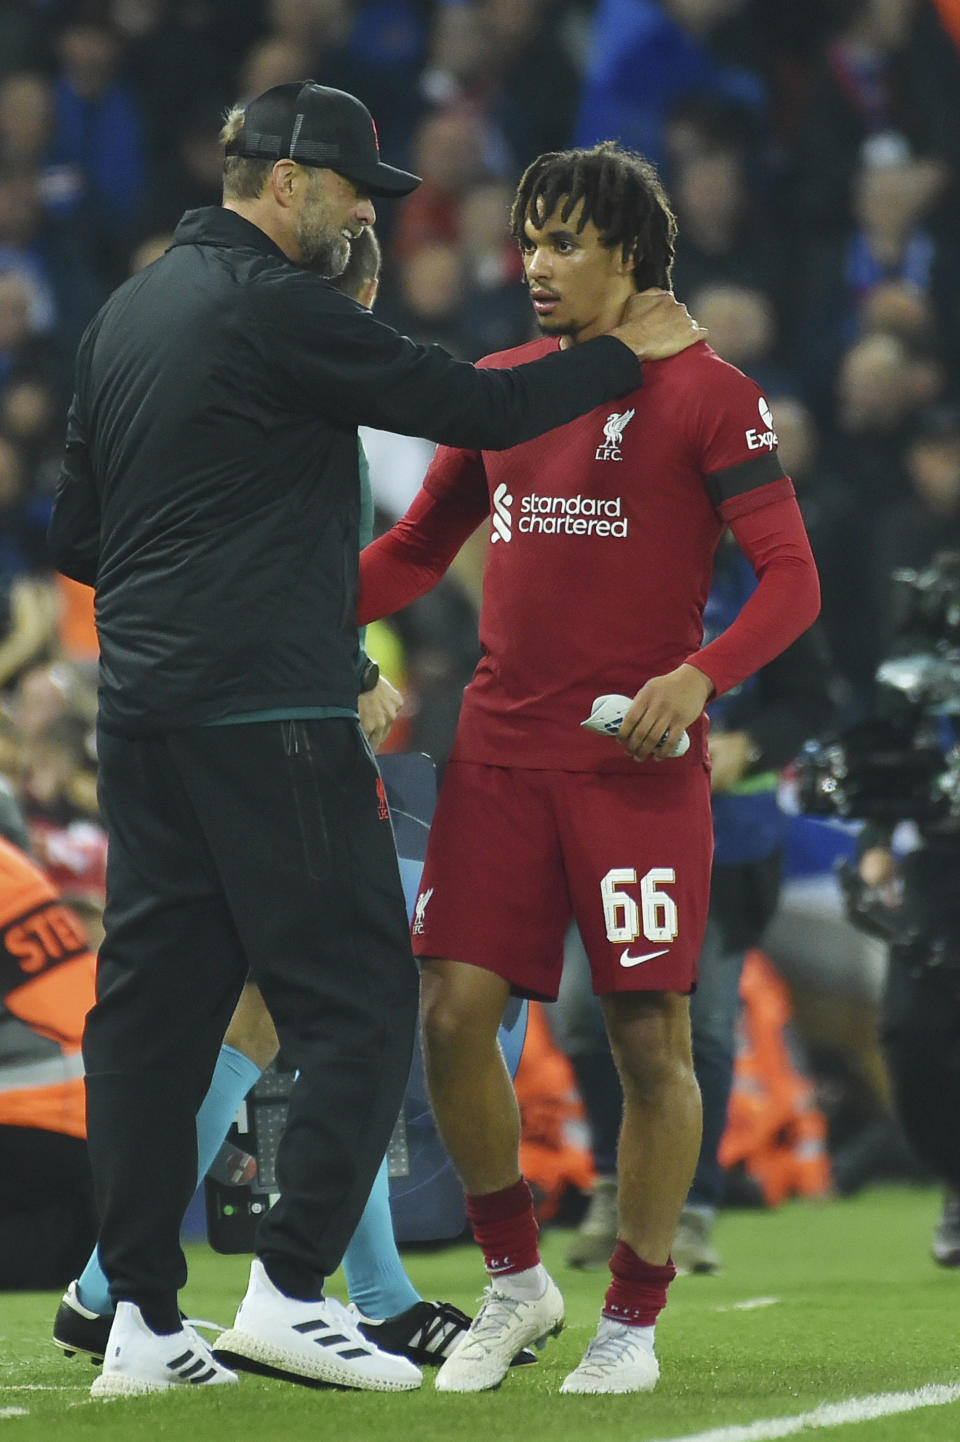 Liverpool's manager Jurgen Klopp, left, talks with Liverpool's Trent Alexander-Arnold after substitution during the Champions League Group A soccer match between Liverpool and Rangers at Anfield stadium in Liverpool, England, Tuesday Oct. 4, 2022. (AP Photo/Rui Vieira)